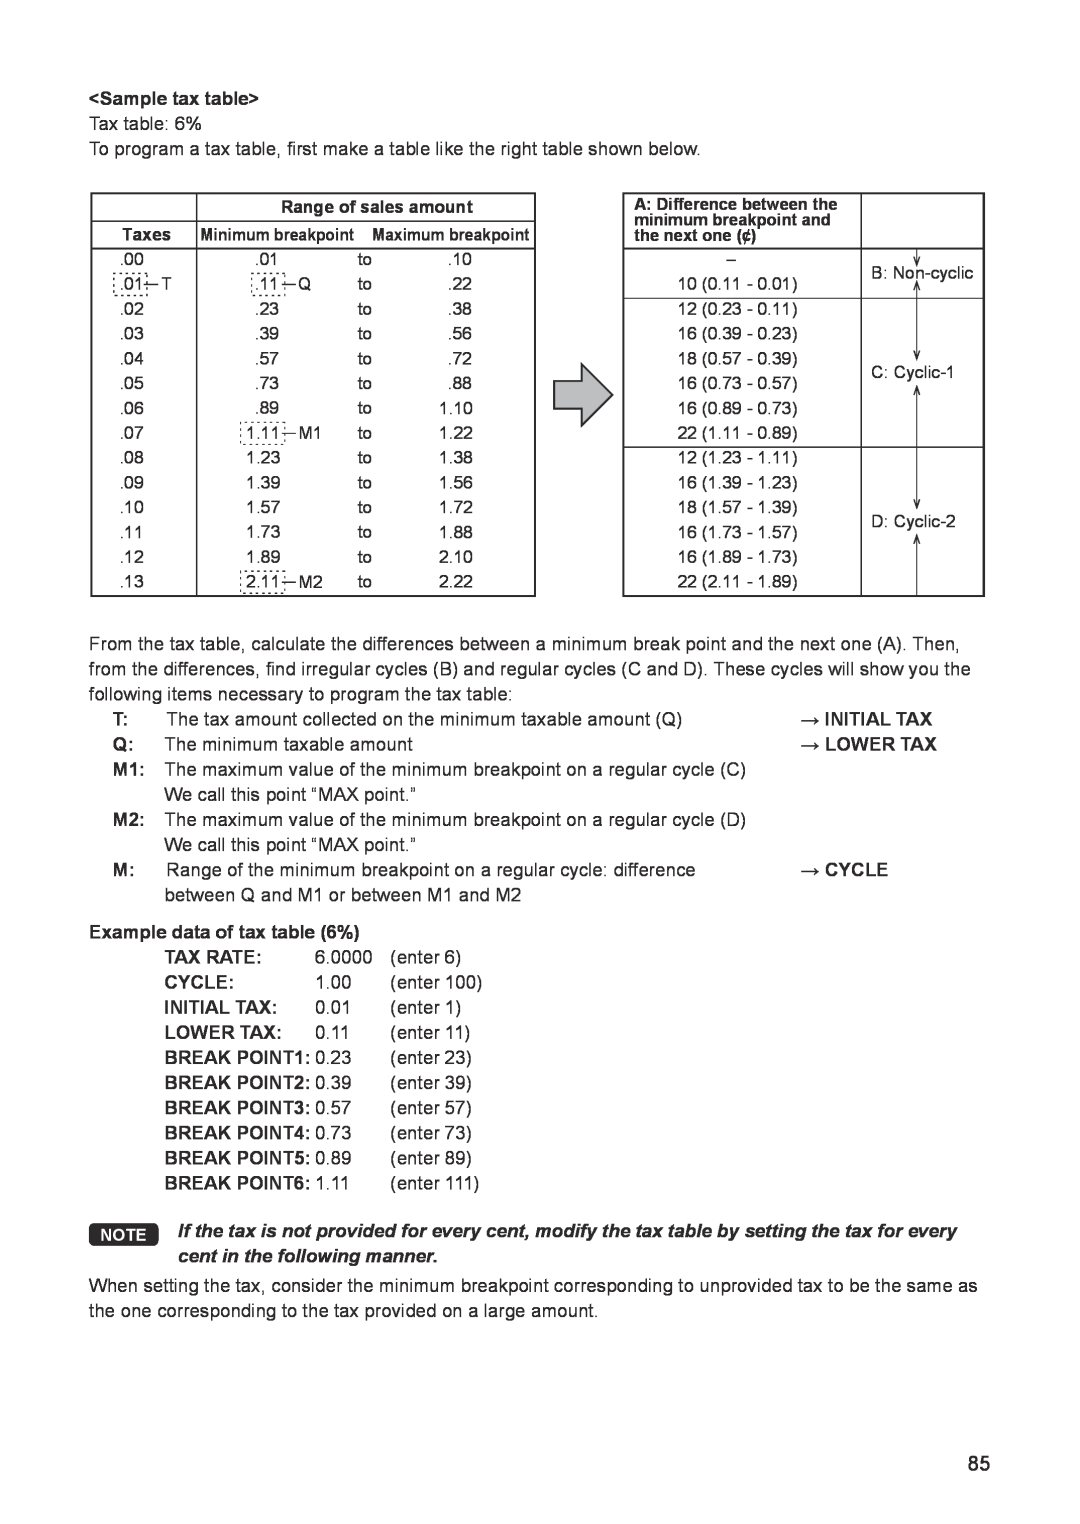 Sharp ER-A347A instruction manual cent in the following manner, Sample tax table Tax % 